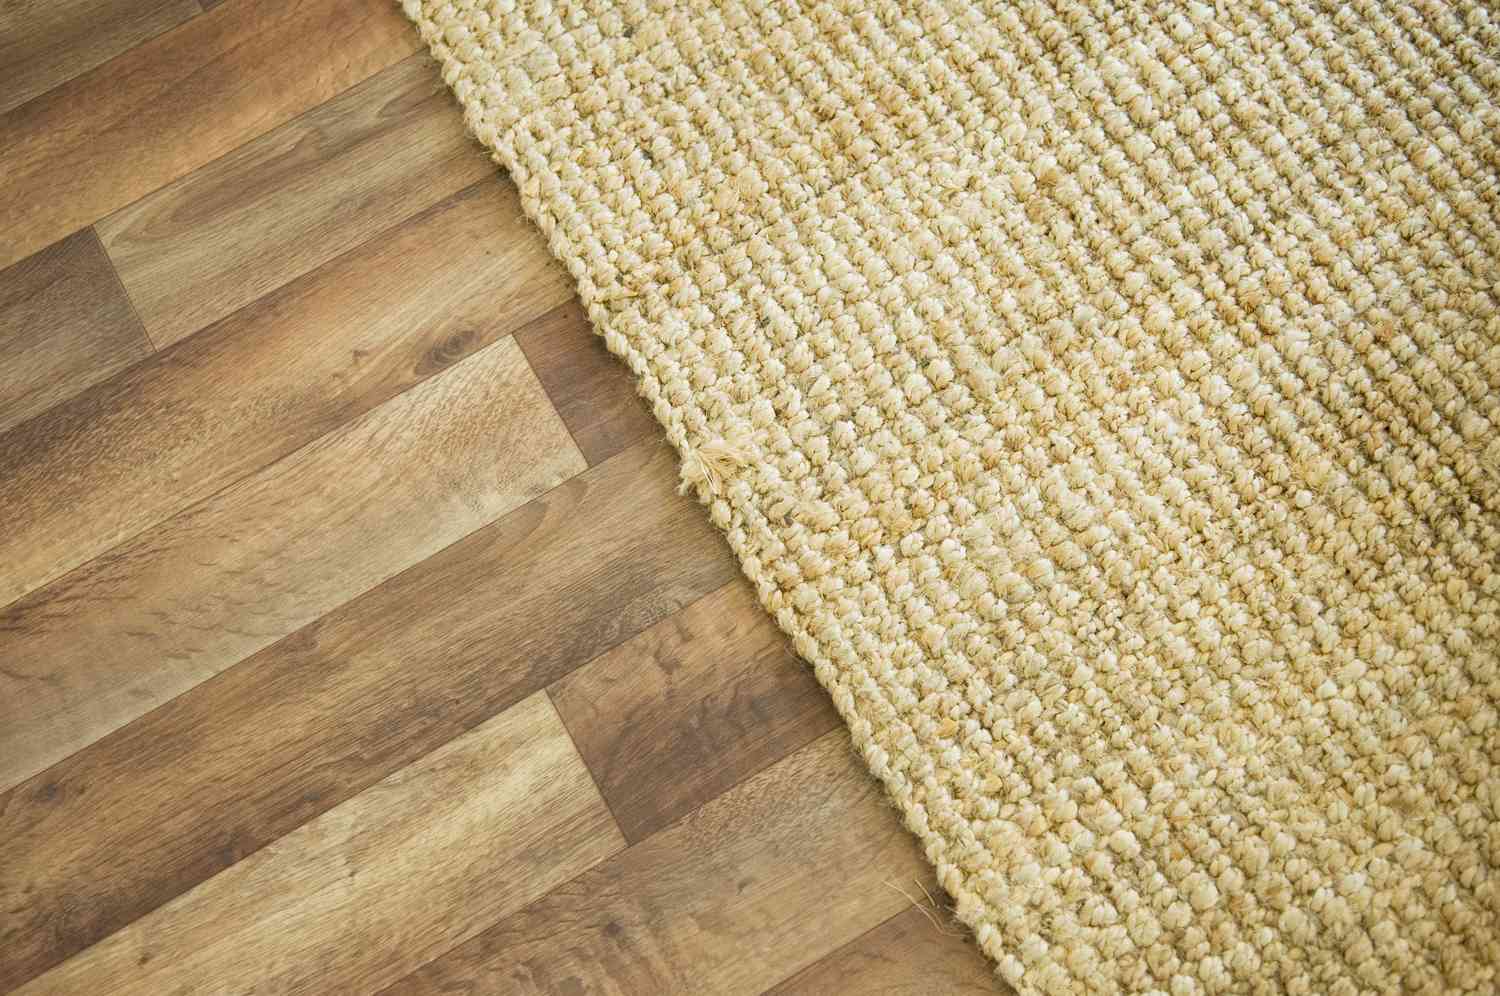 What You Need to Know About Replacing Carpet with Wood Flooring